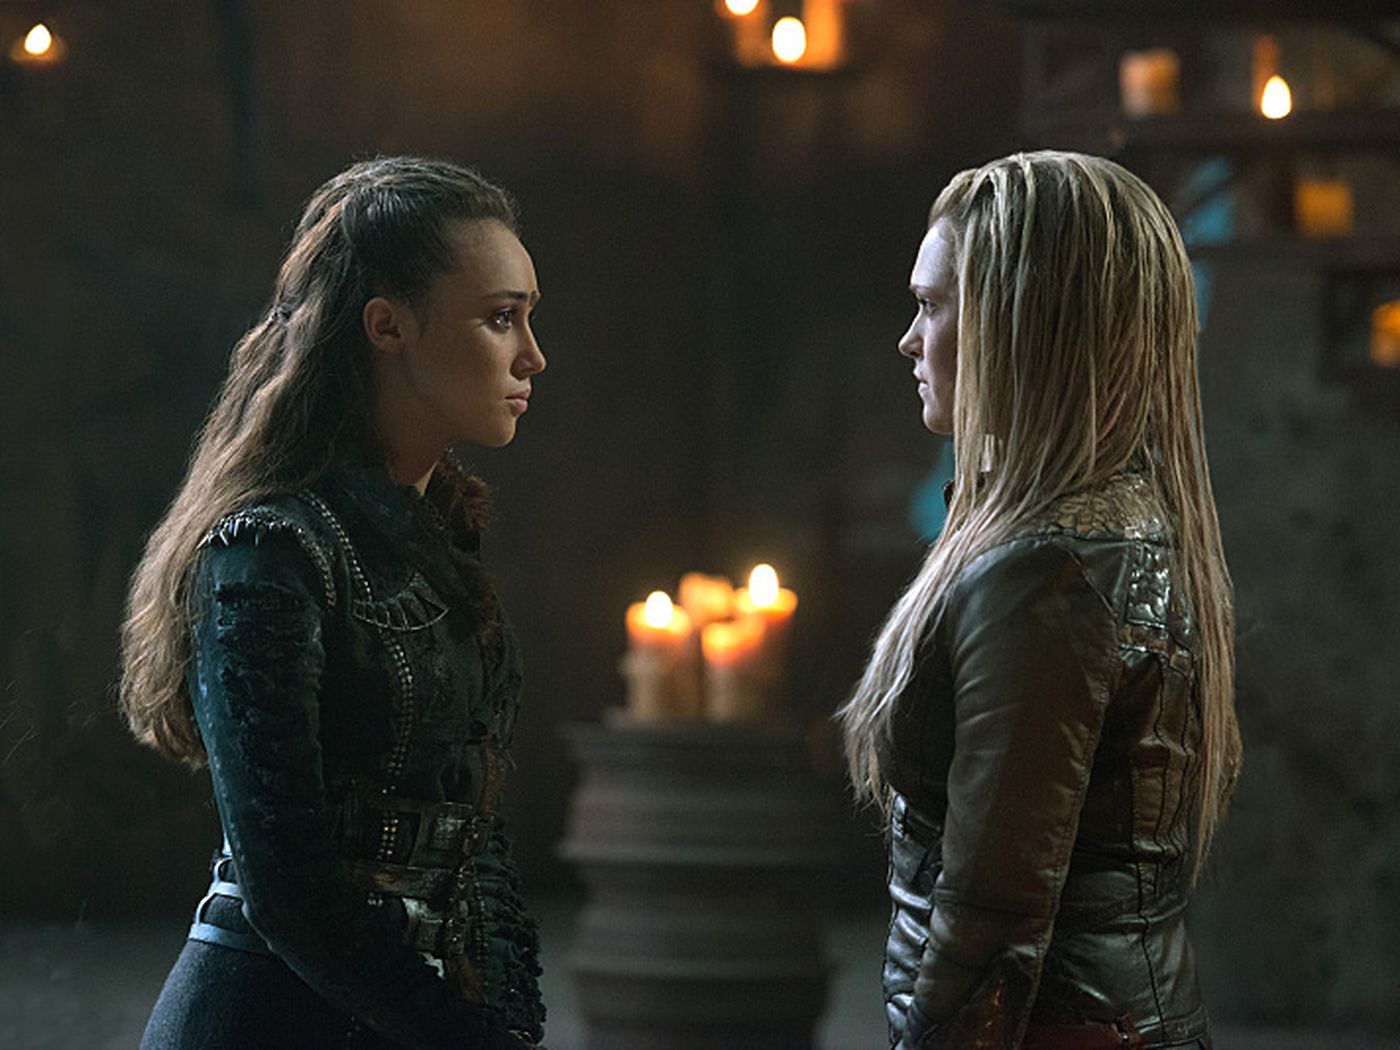 Lexa from "The 100" (left) poses with Clarke Griffin (right).